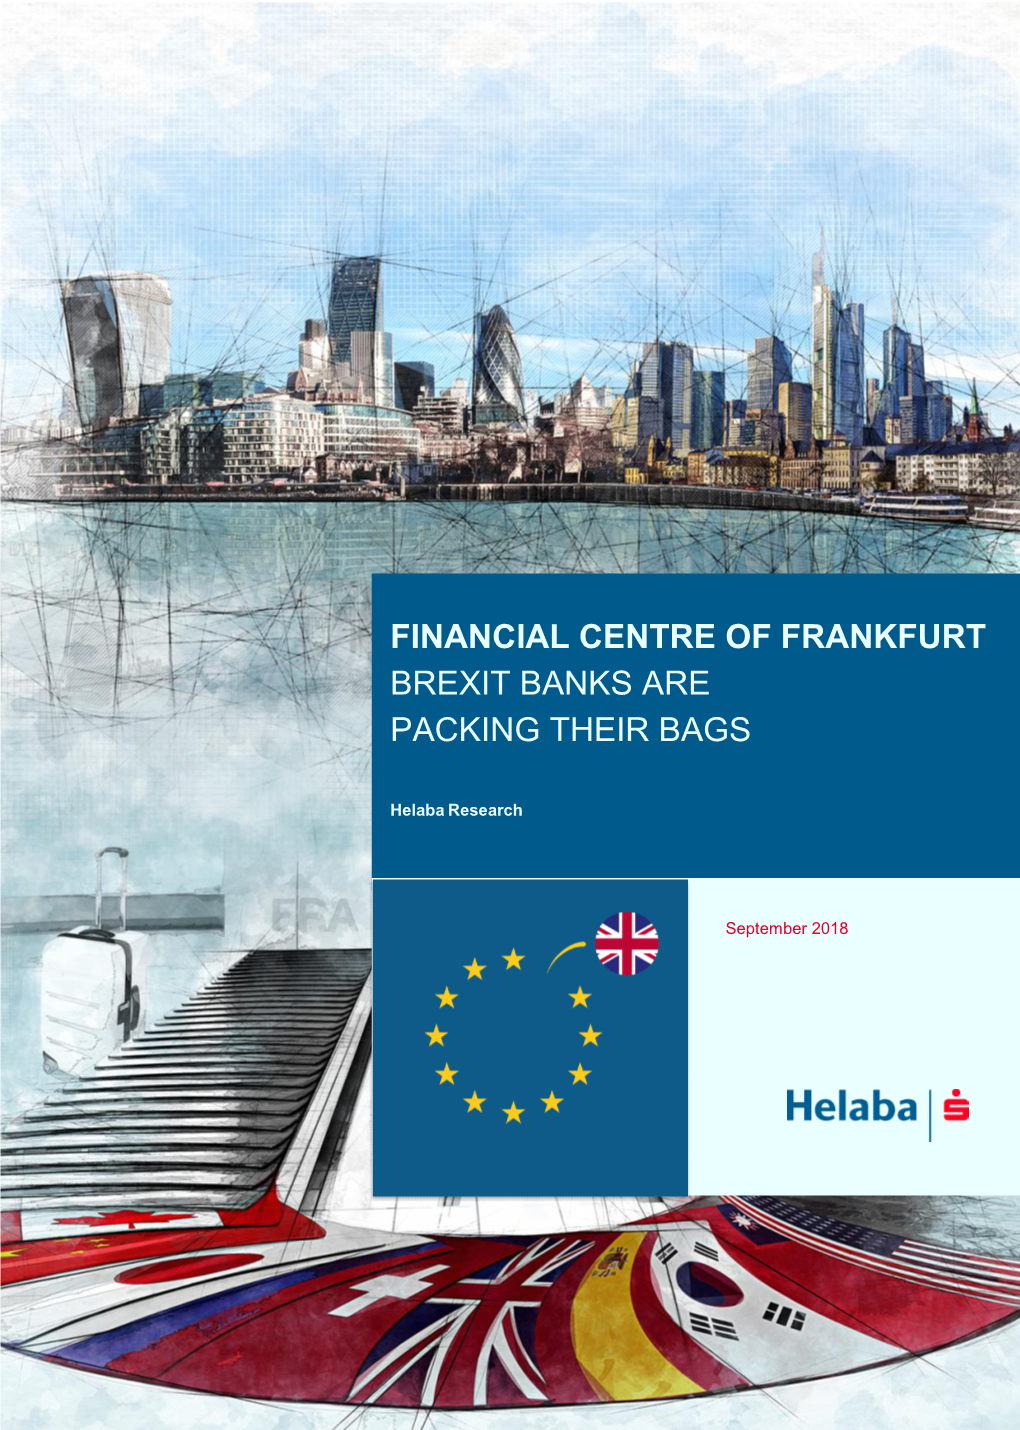 Financial Centre of Frankfurt Brexit Banks Are Packing Their Bags